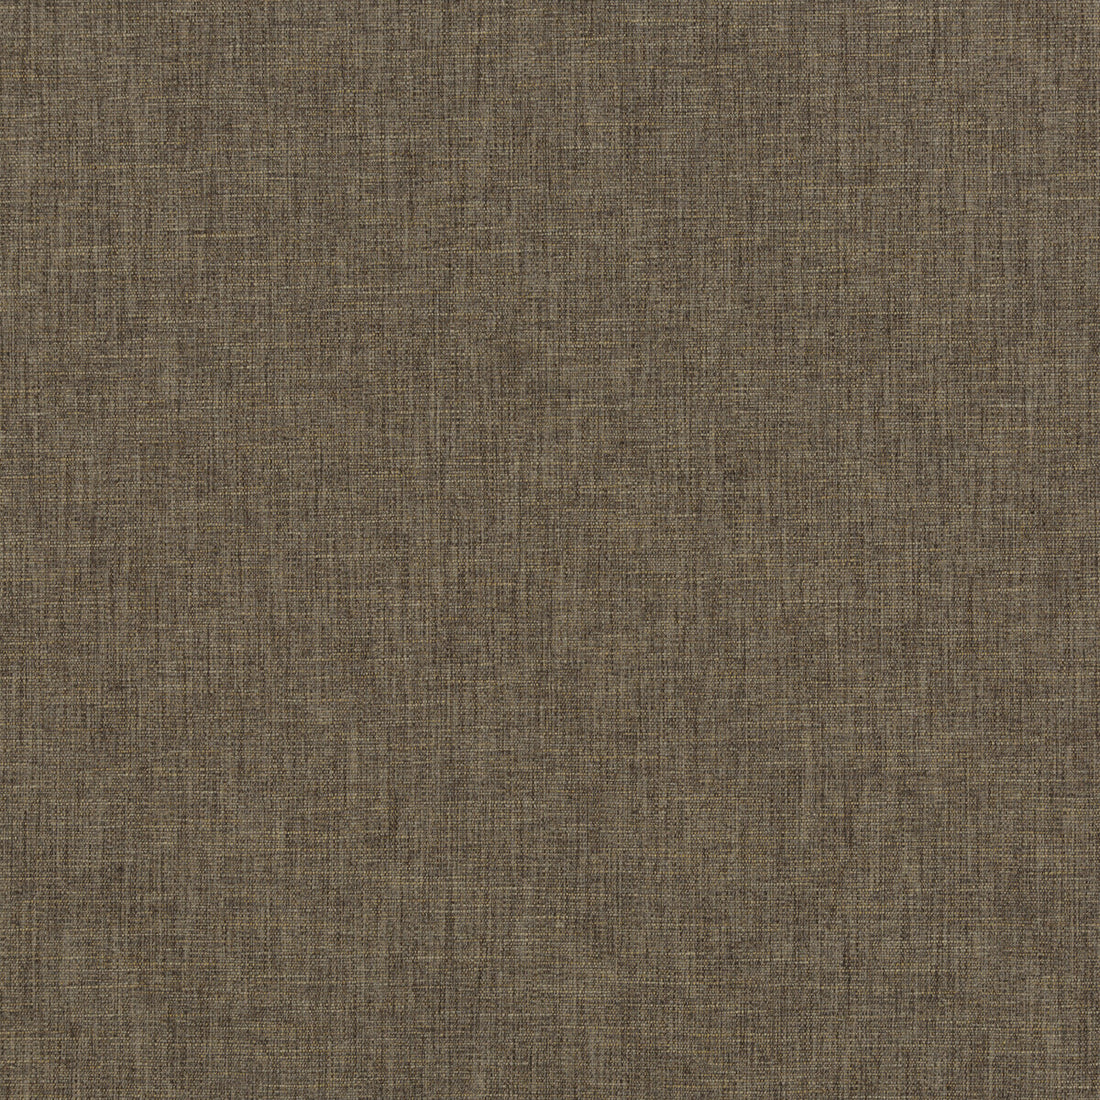 Kinnerton fabric in hemp color - pattern PF50414.180.0 - by Baker Lifestyle in the Notebooks collection